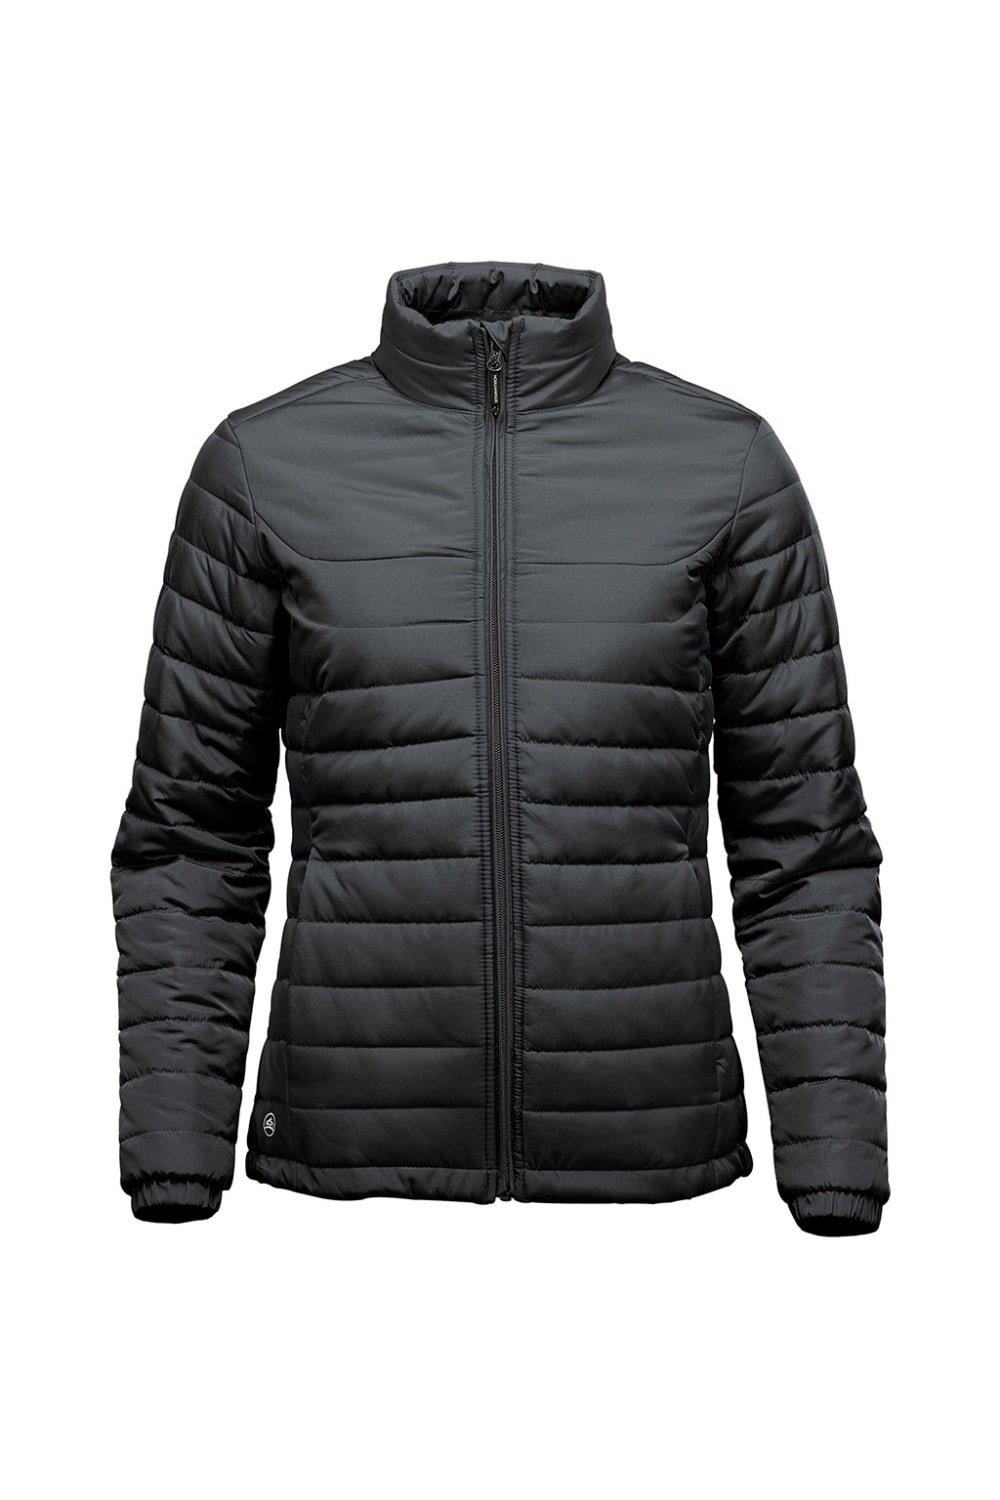 Stormtech Women's Nautilus Quilted Padded Jacket|Size: XL|black